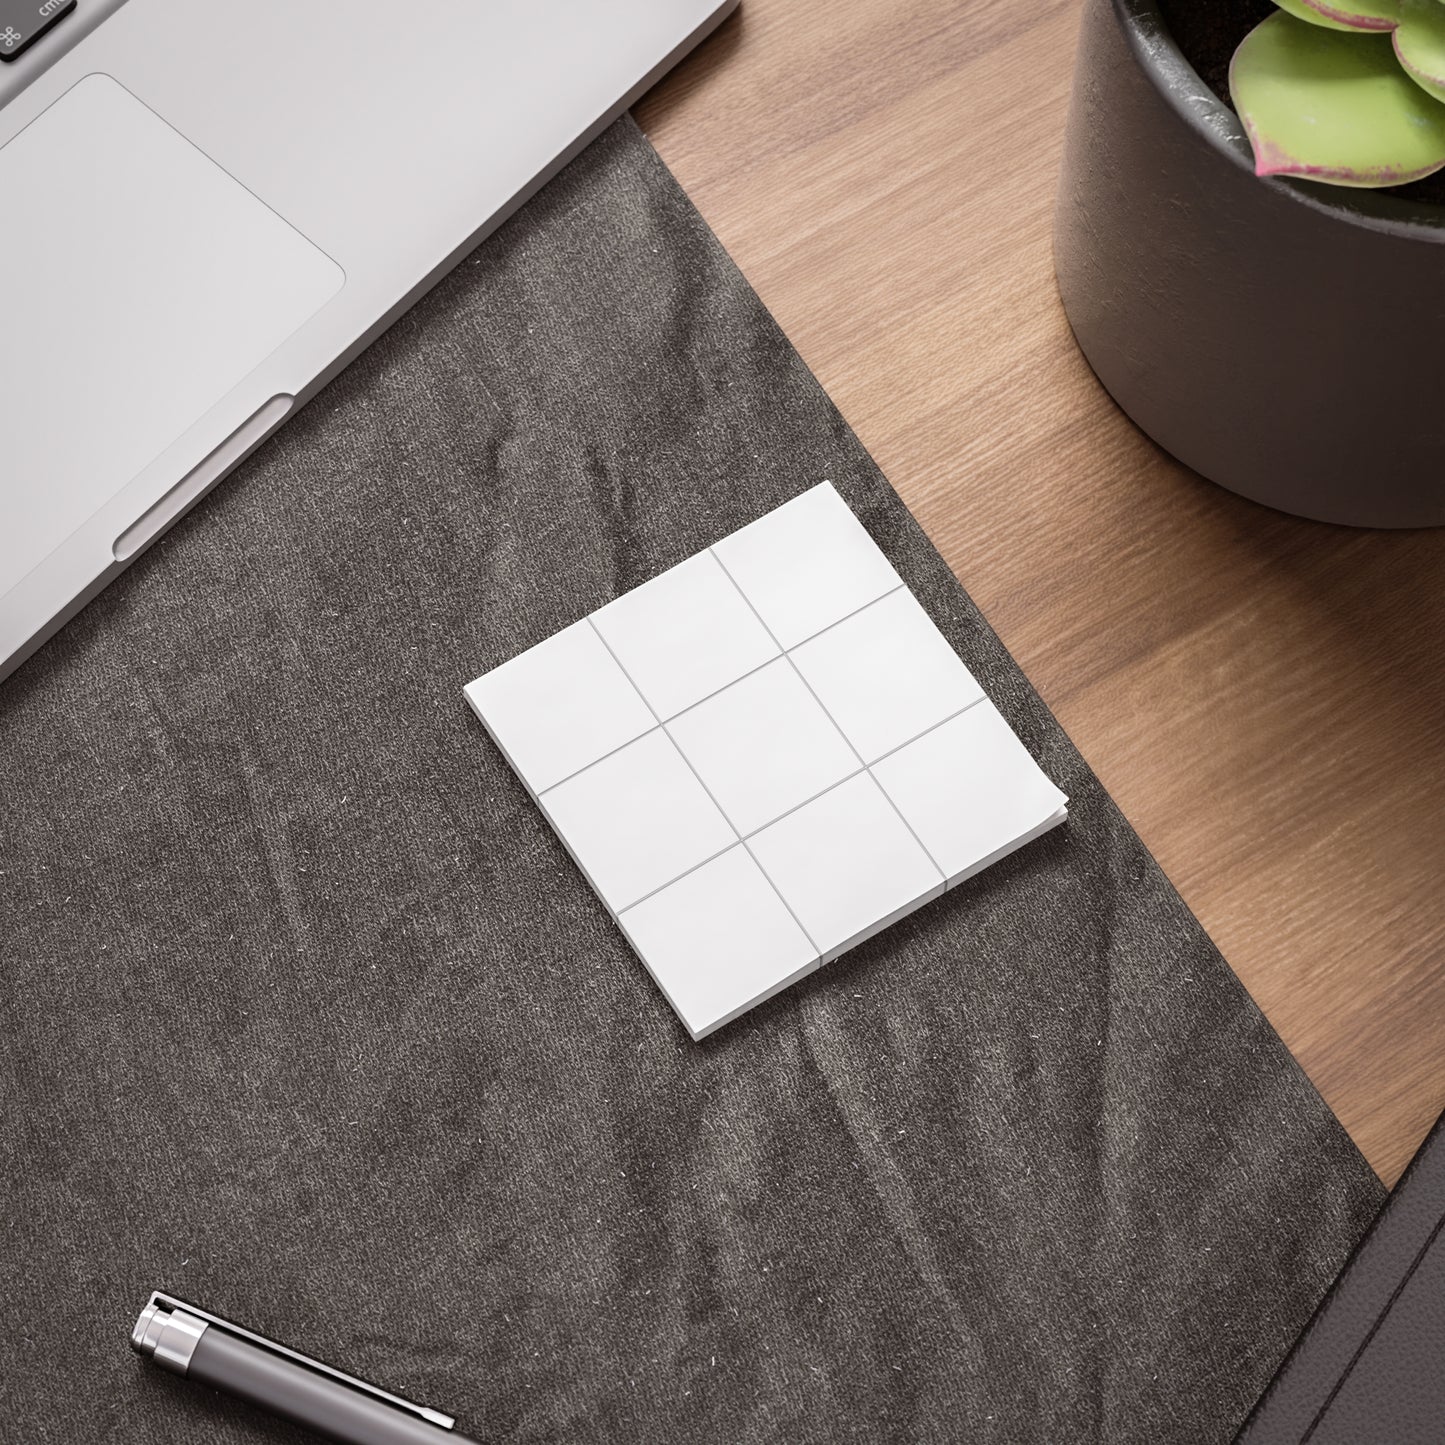 Checkerboard | To-Do List | Productive Post-it® Note Pads - White